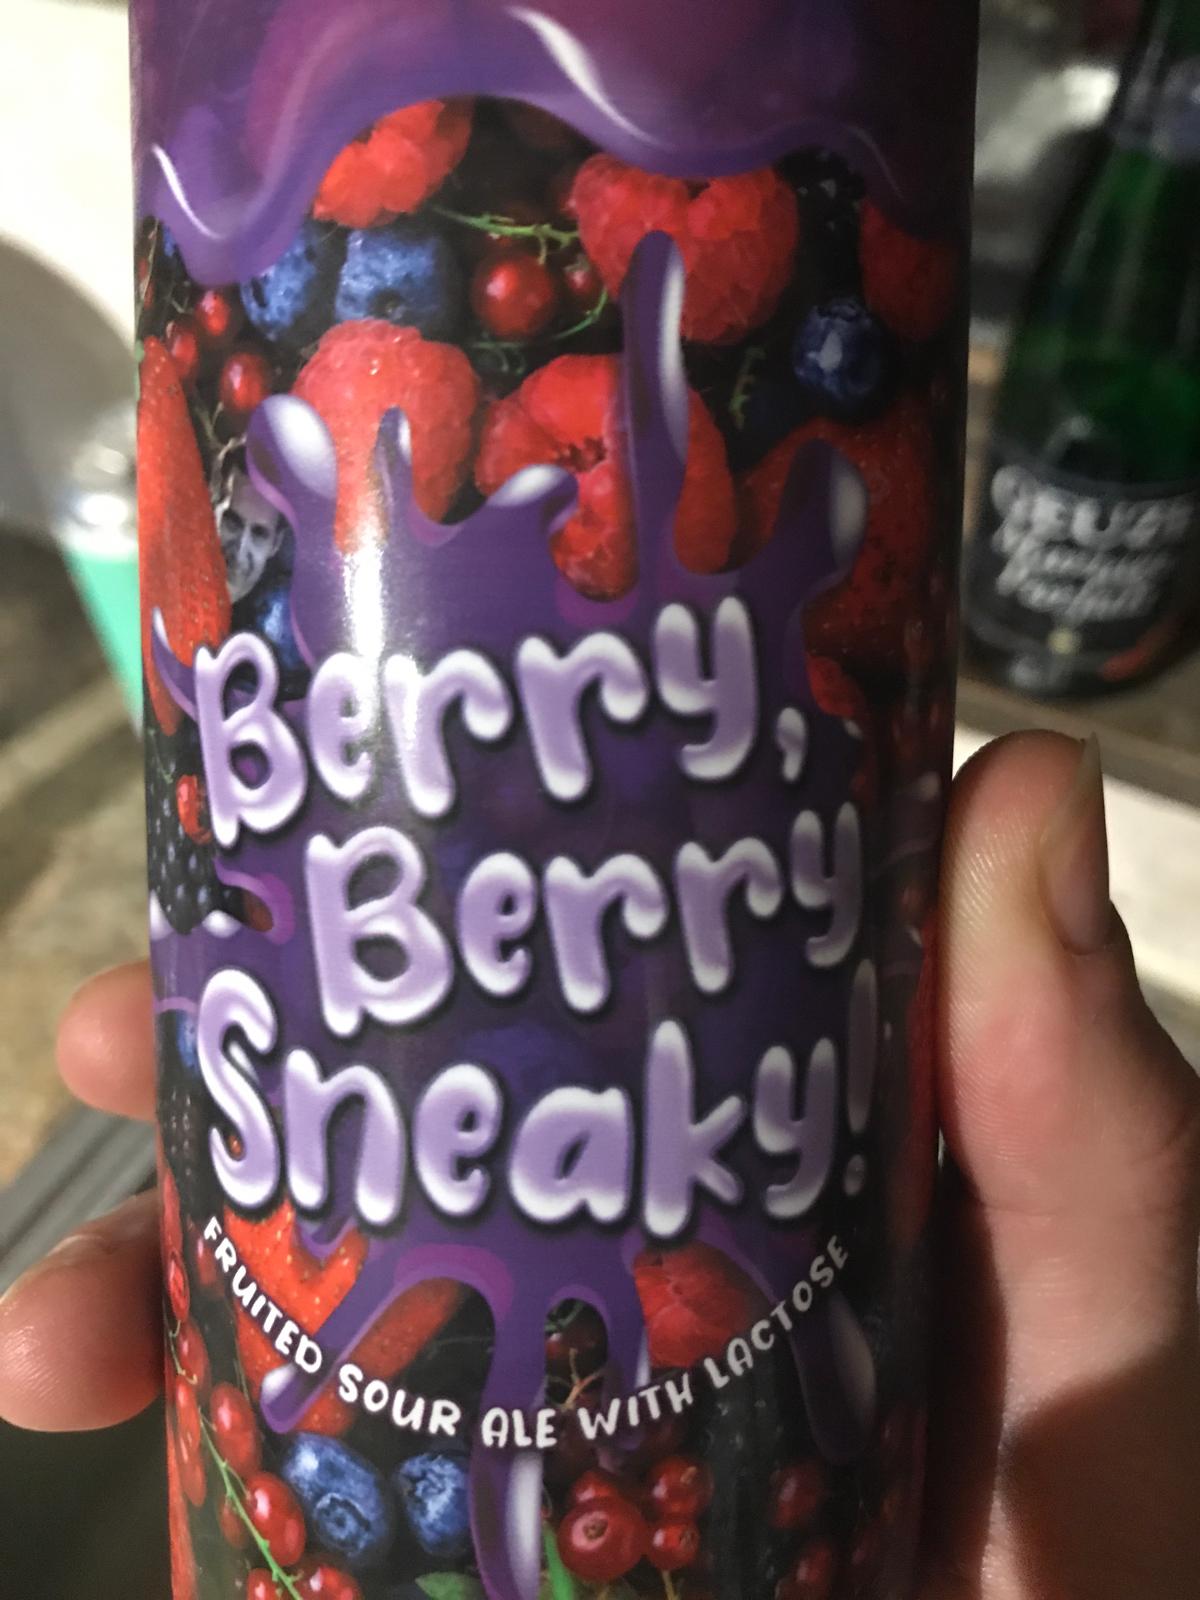 Berry Berry Sneaky